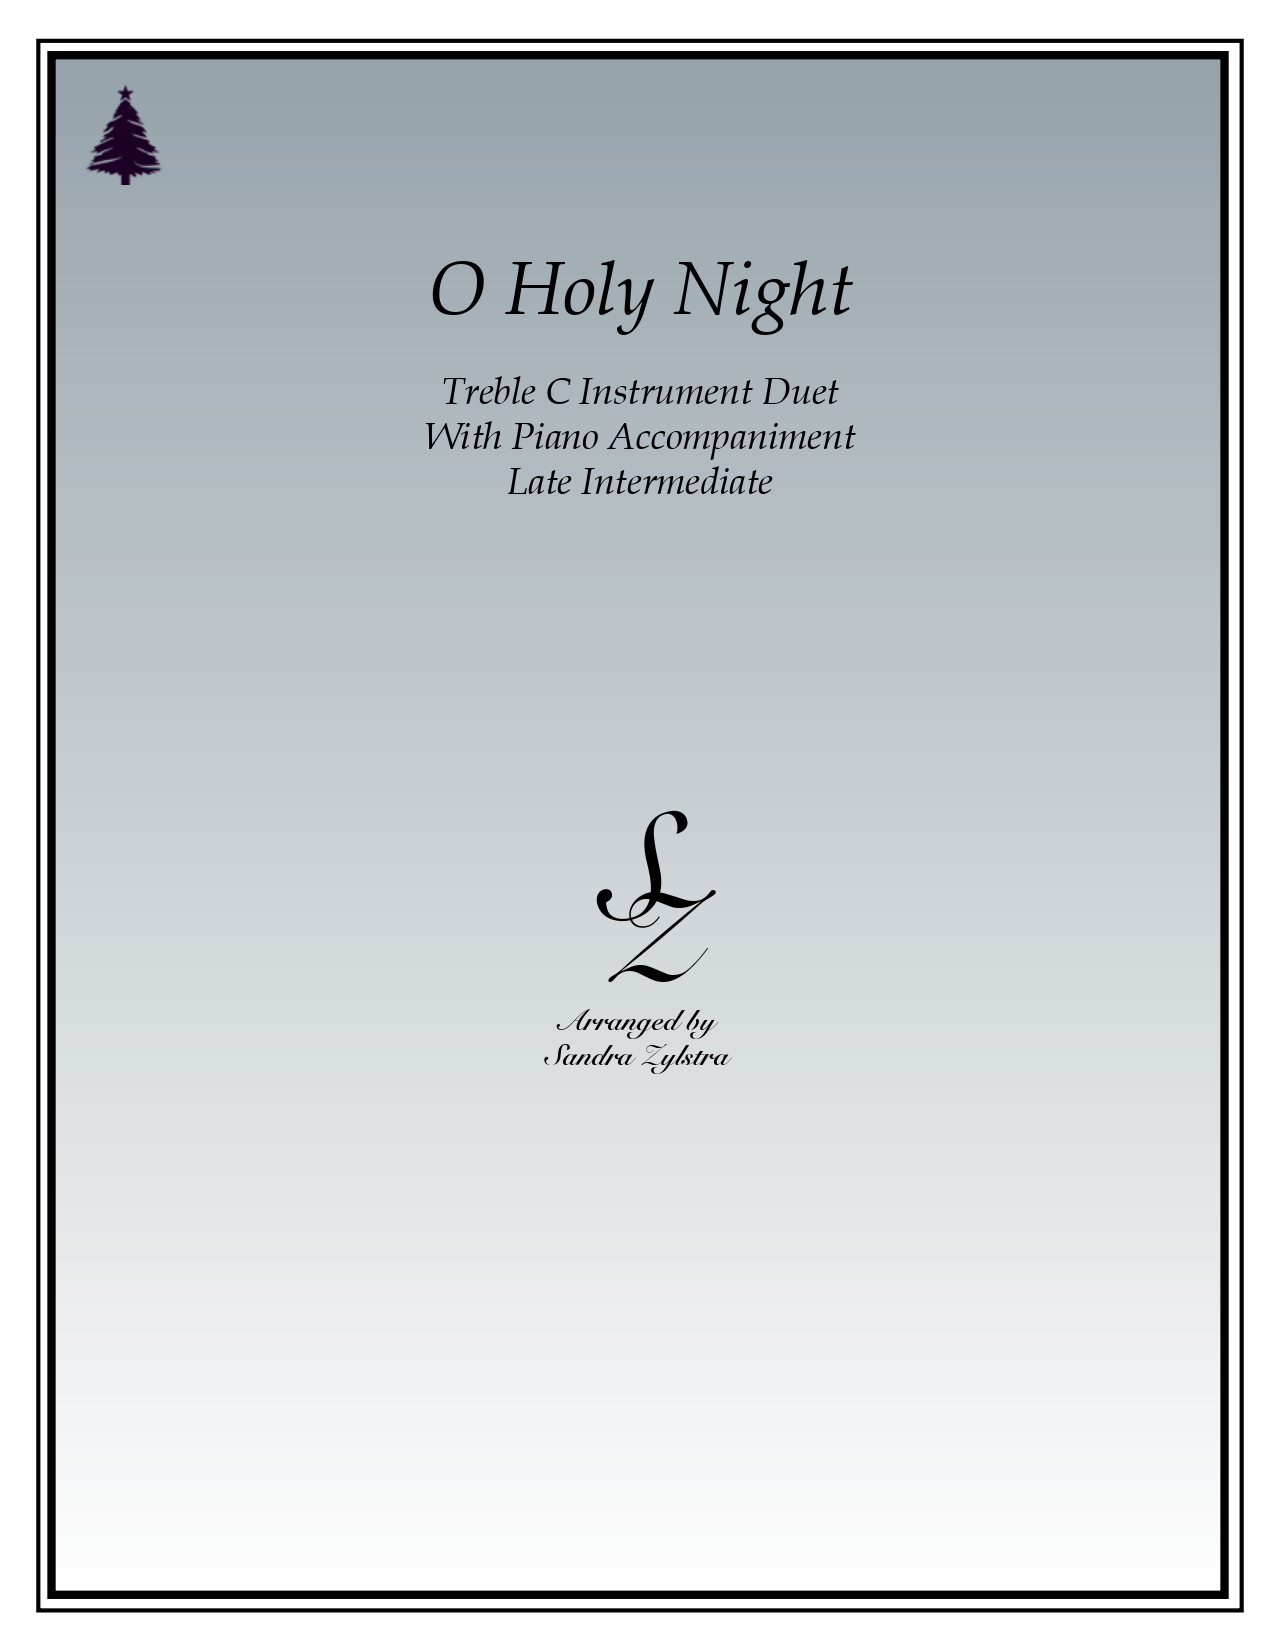 O Holy NIght treble C instrument duet parts cover page 00011